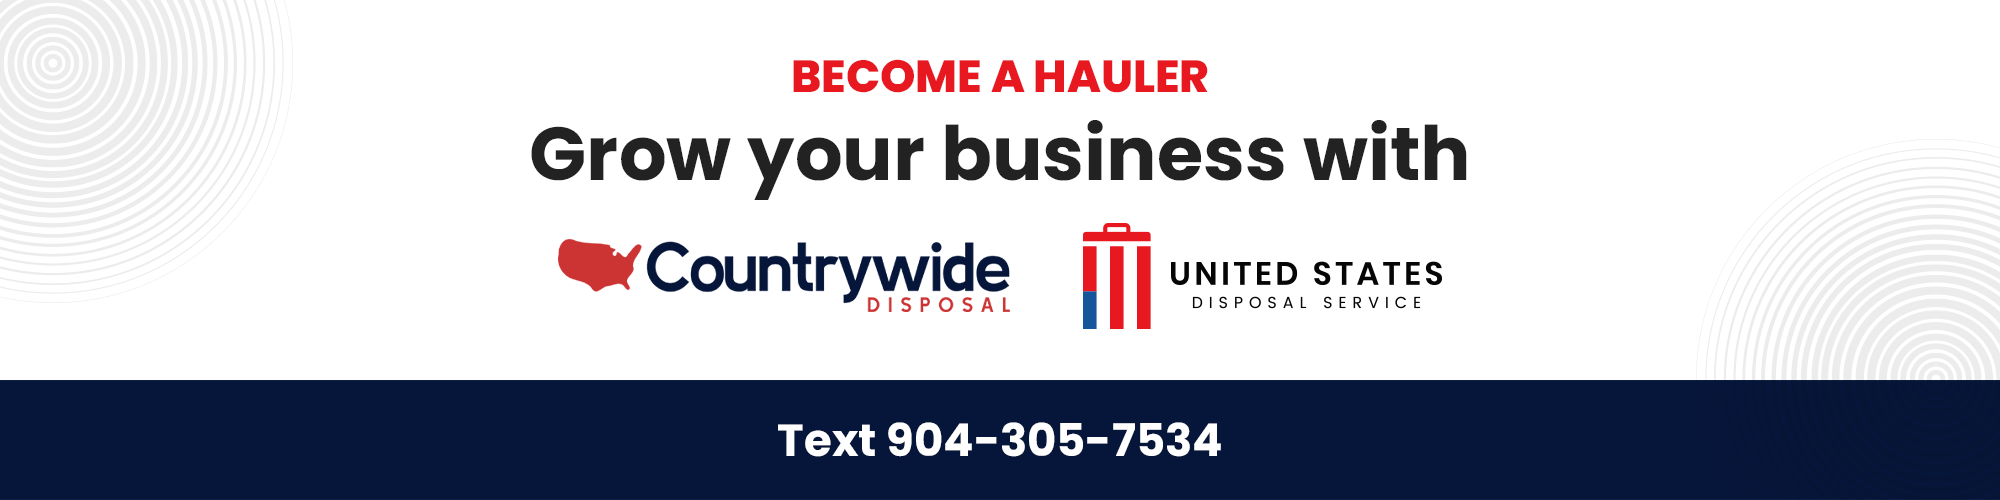 #23748 - Banner Ad for Become a Hauler